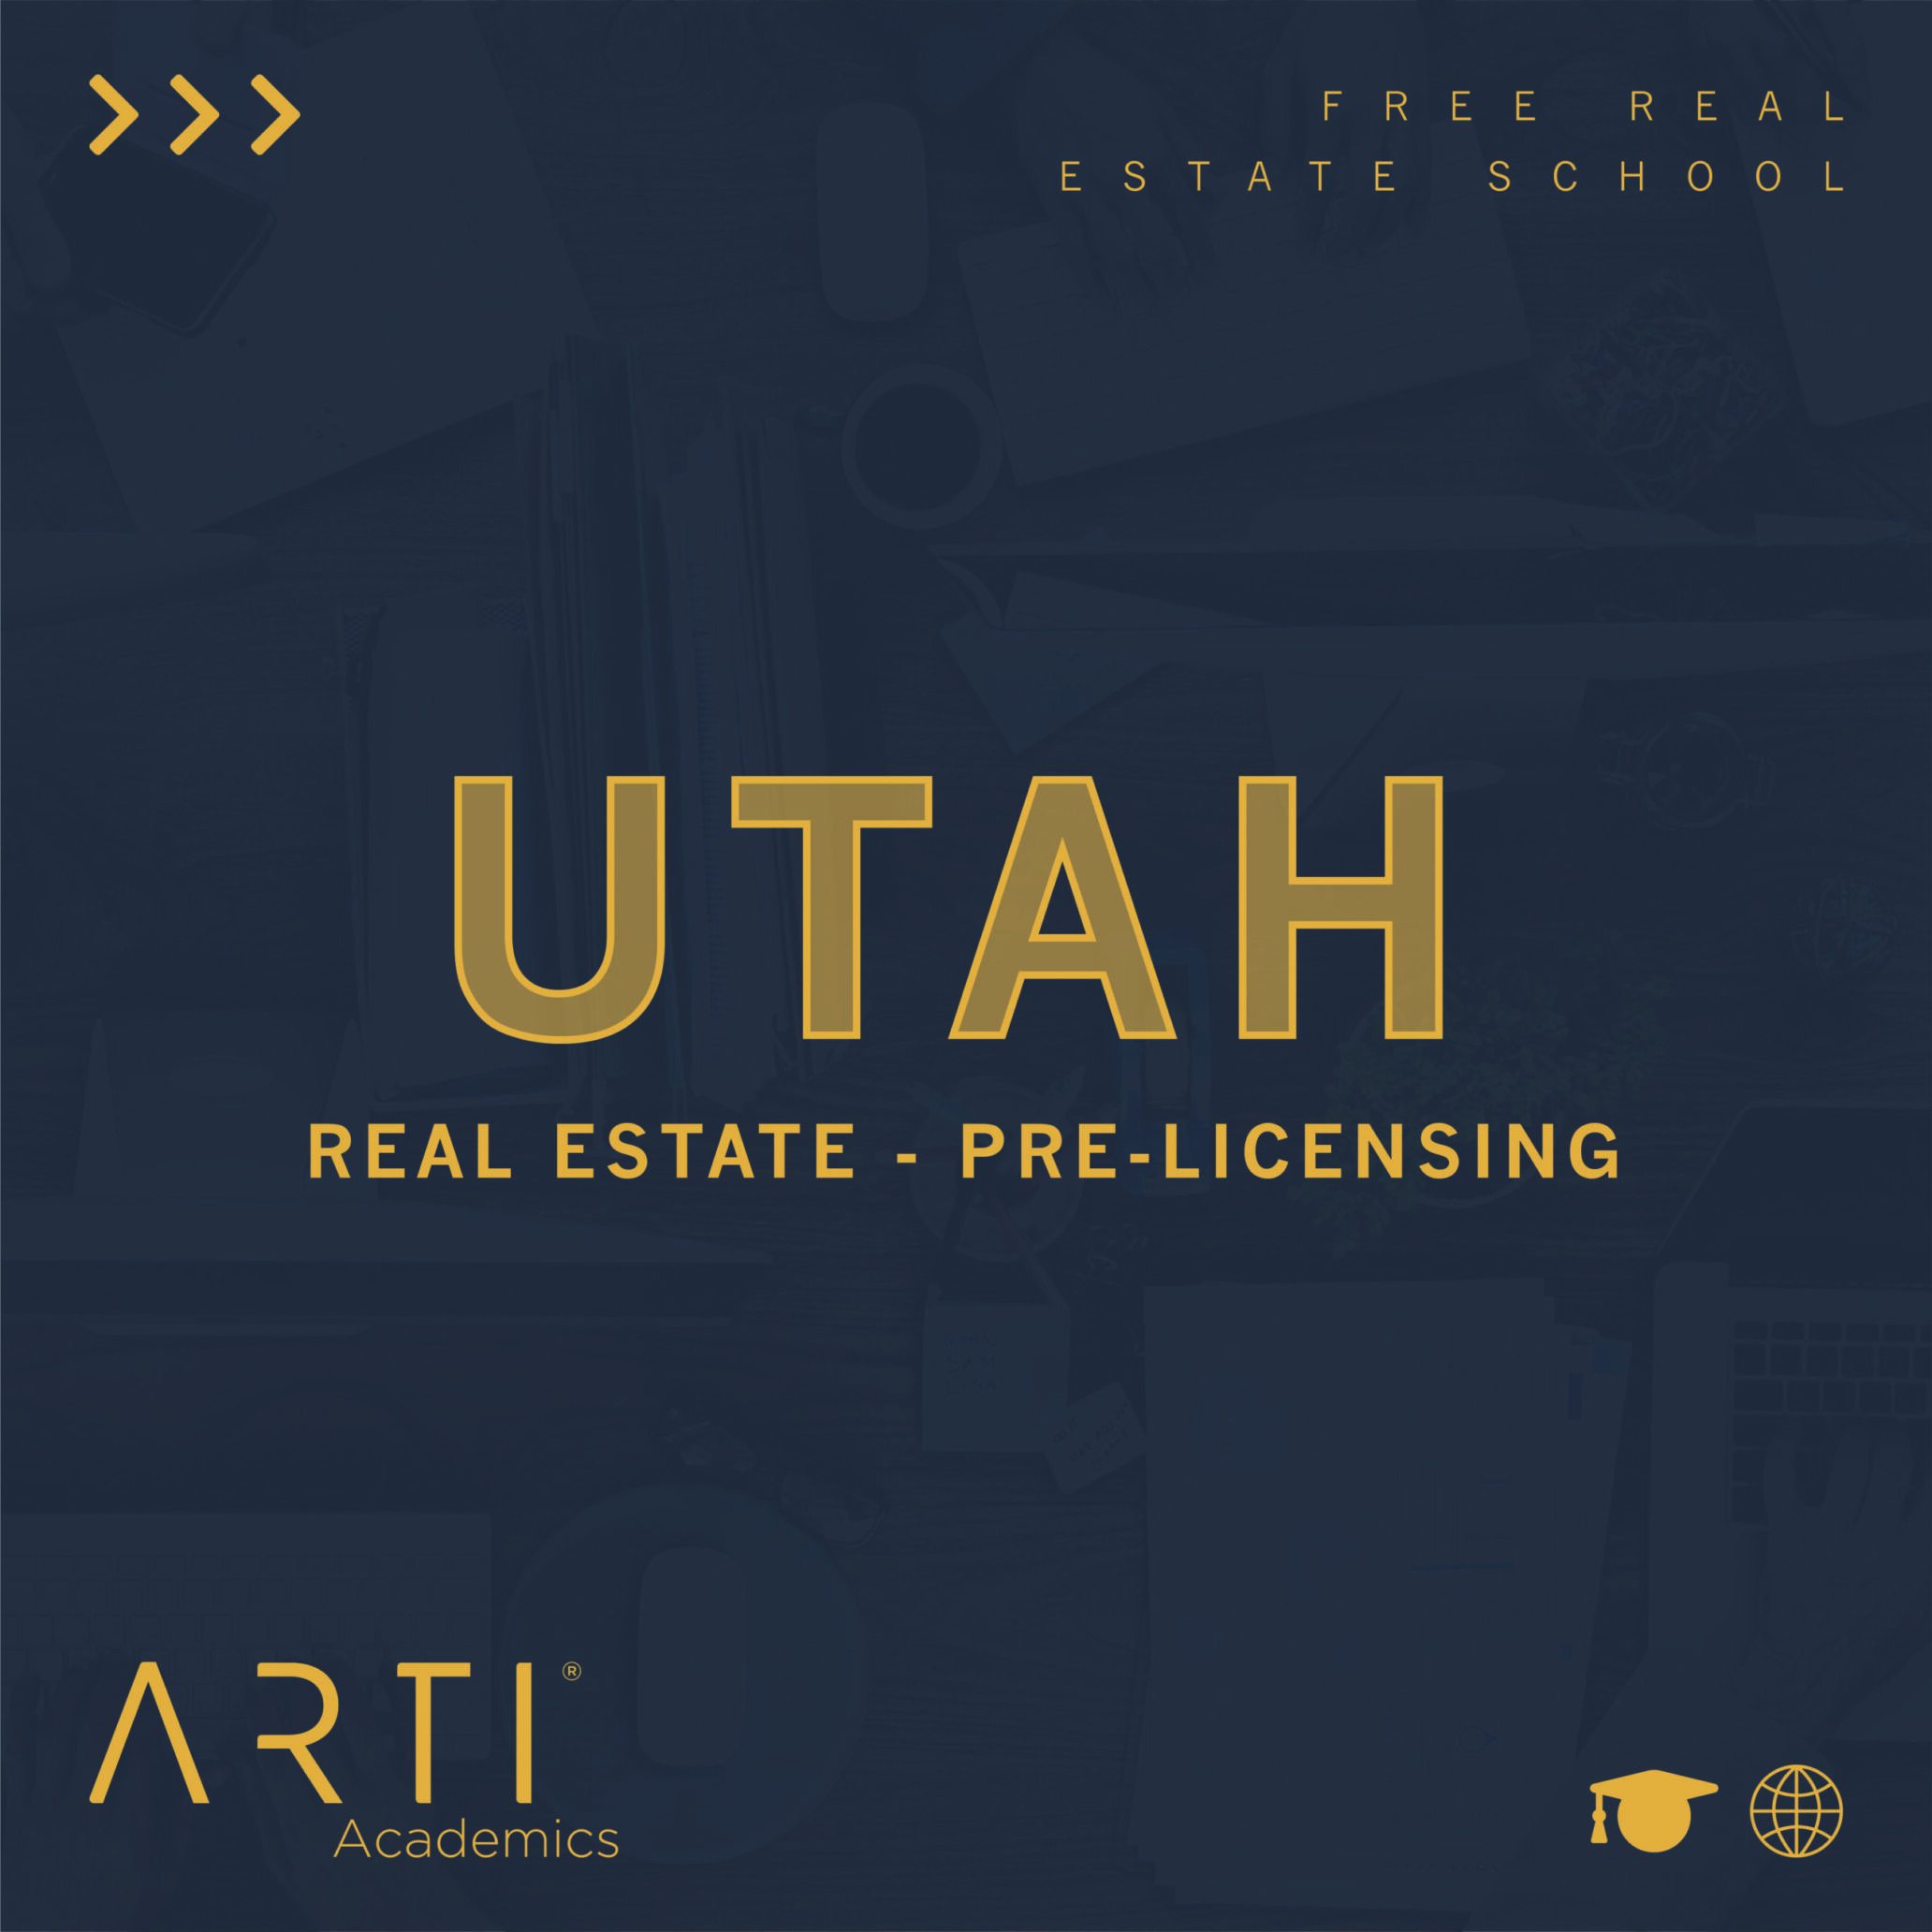 ARTI Academics - Did you know that ARTI Academics has a help center full of  commonly asked Real Estate questions and more? We are here to help!   . .  #ARTIAcademics #RealEstateSchool